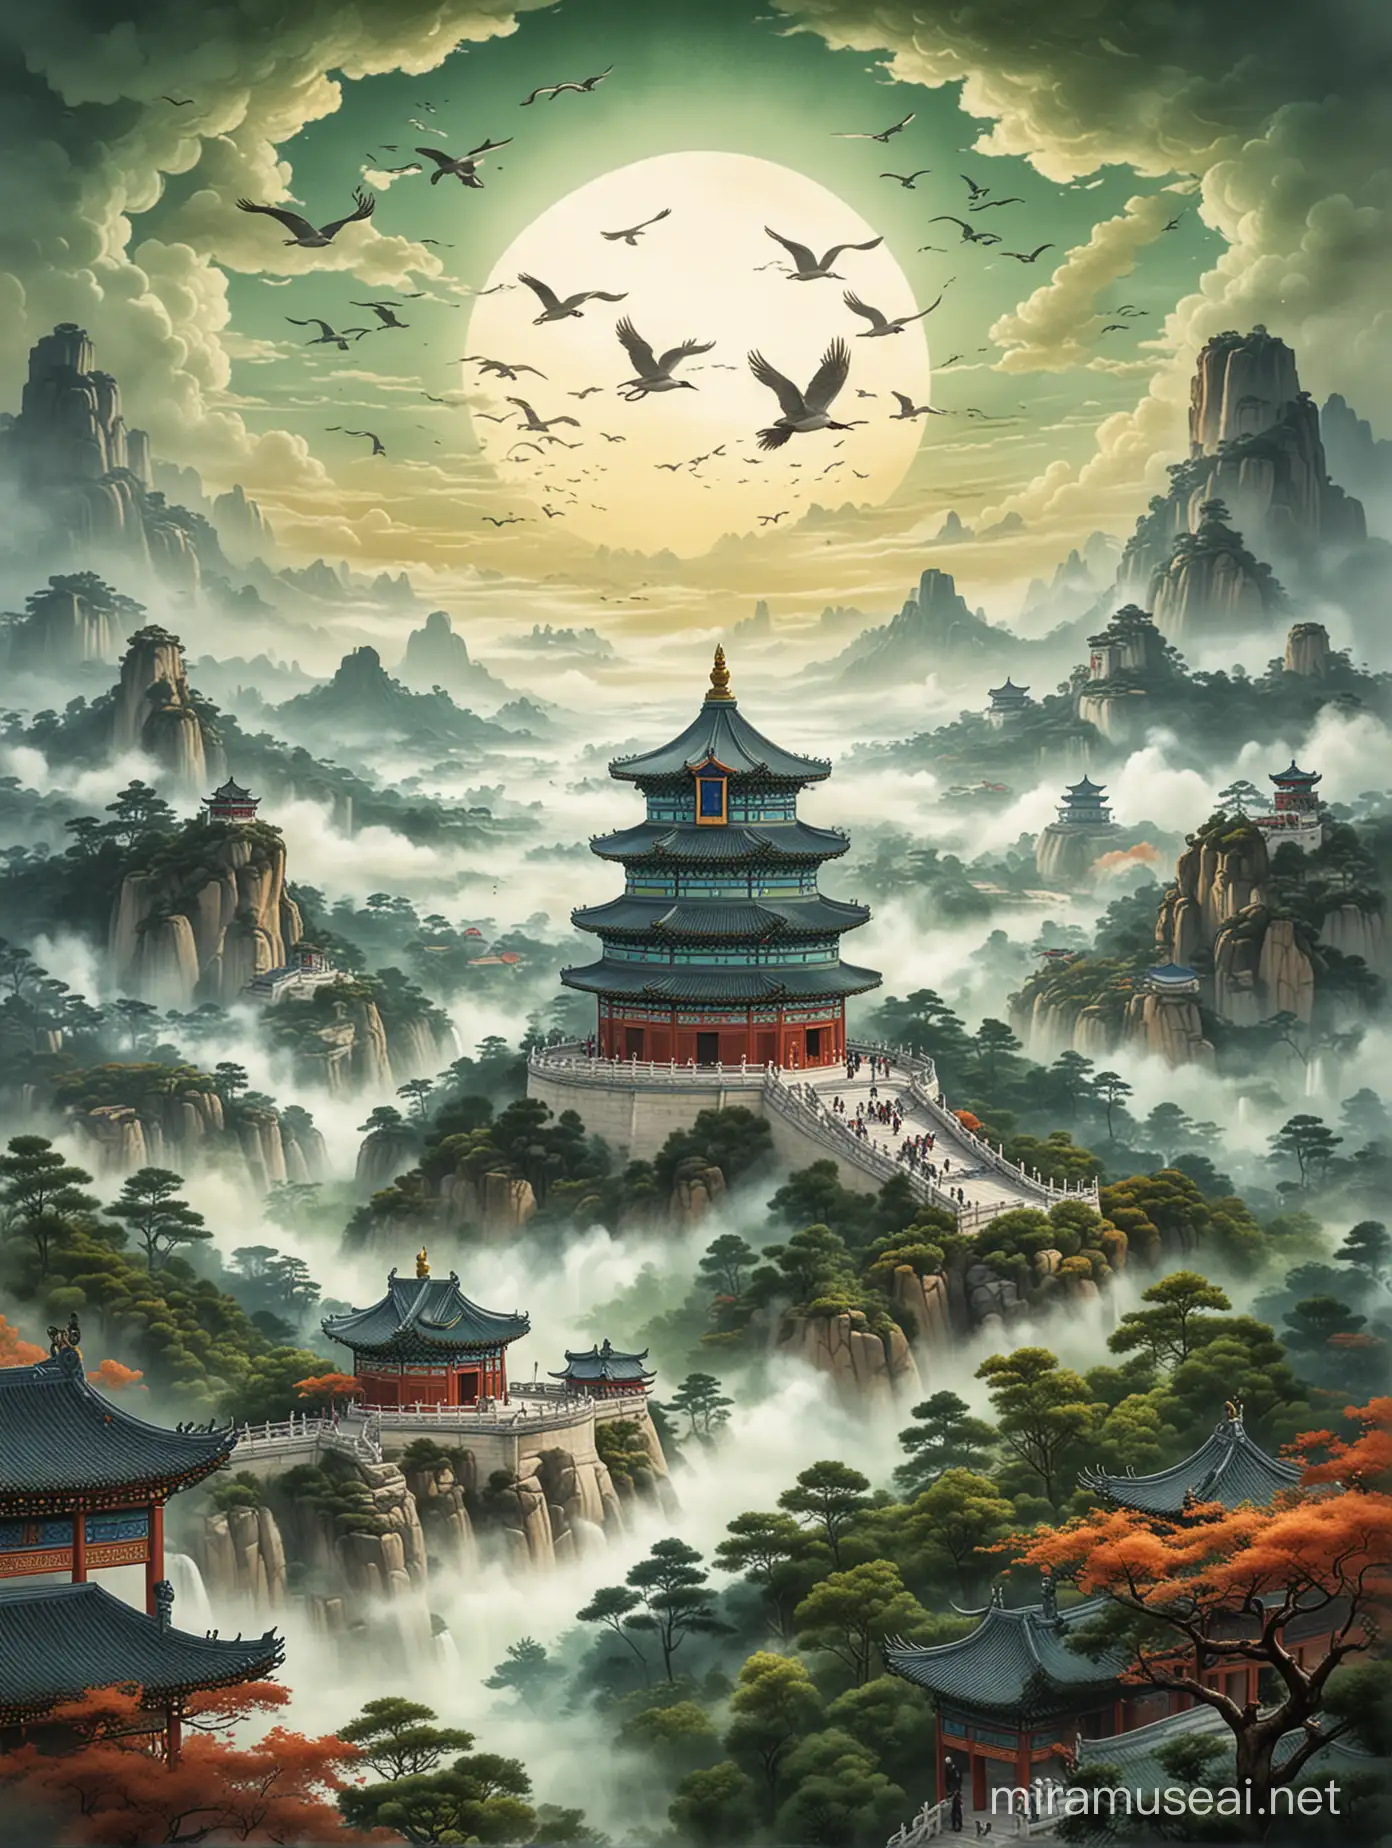 Temple of Heaven, ancient architecture, illustrations, masterpieces, colorful auspicious clouds, cranes, green mountains, halos，Castle in the Sky, Bird view, atmospheric lighting, Tradition Chinese Ink Painting style, 